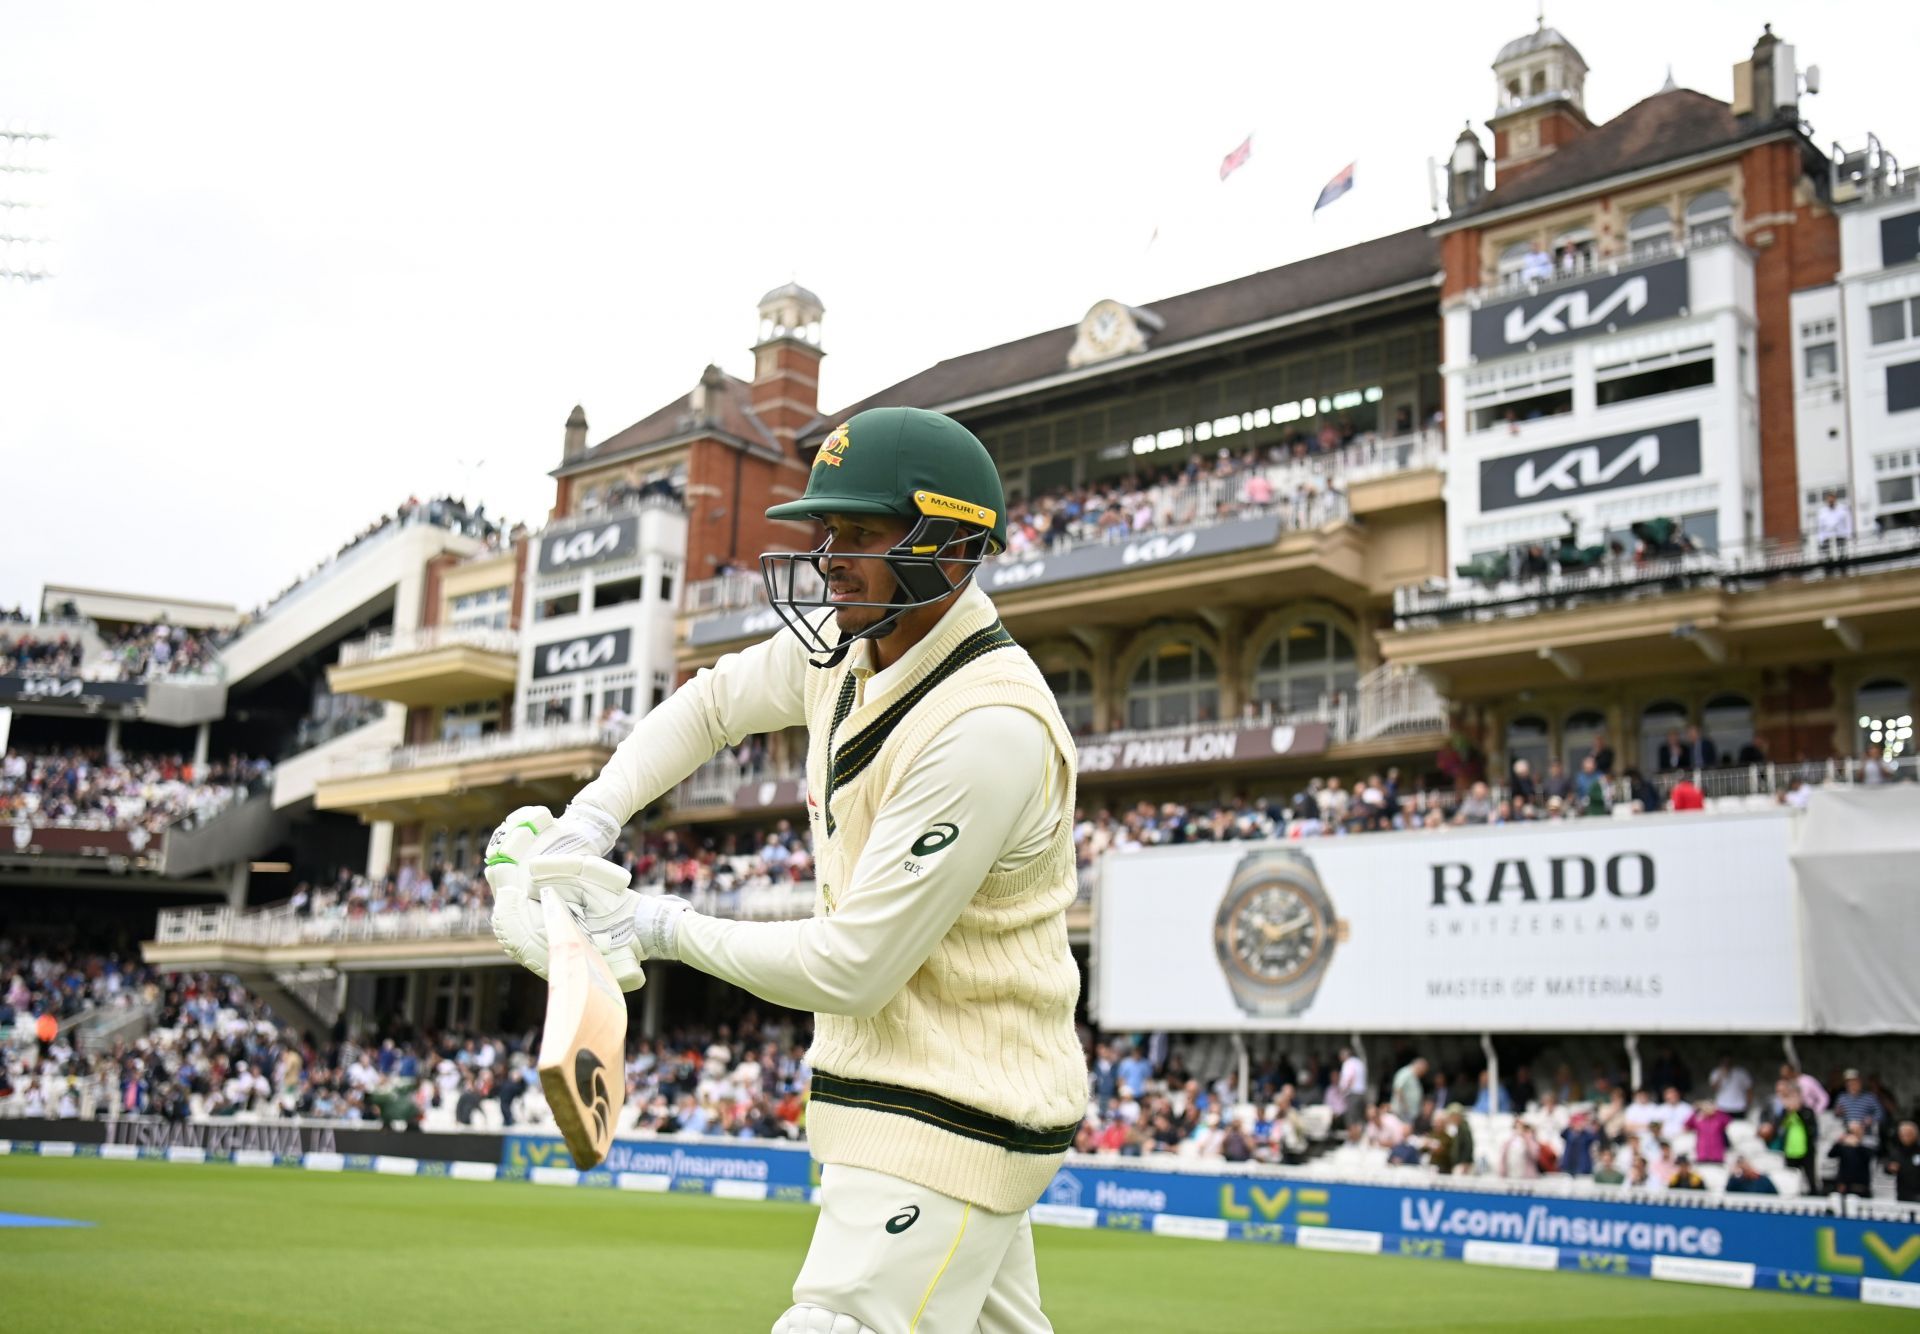 The 36-year-old has a fantastic Test record against Pakistan. (Pic: Getty Images)